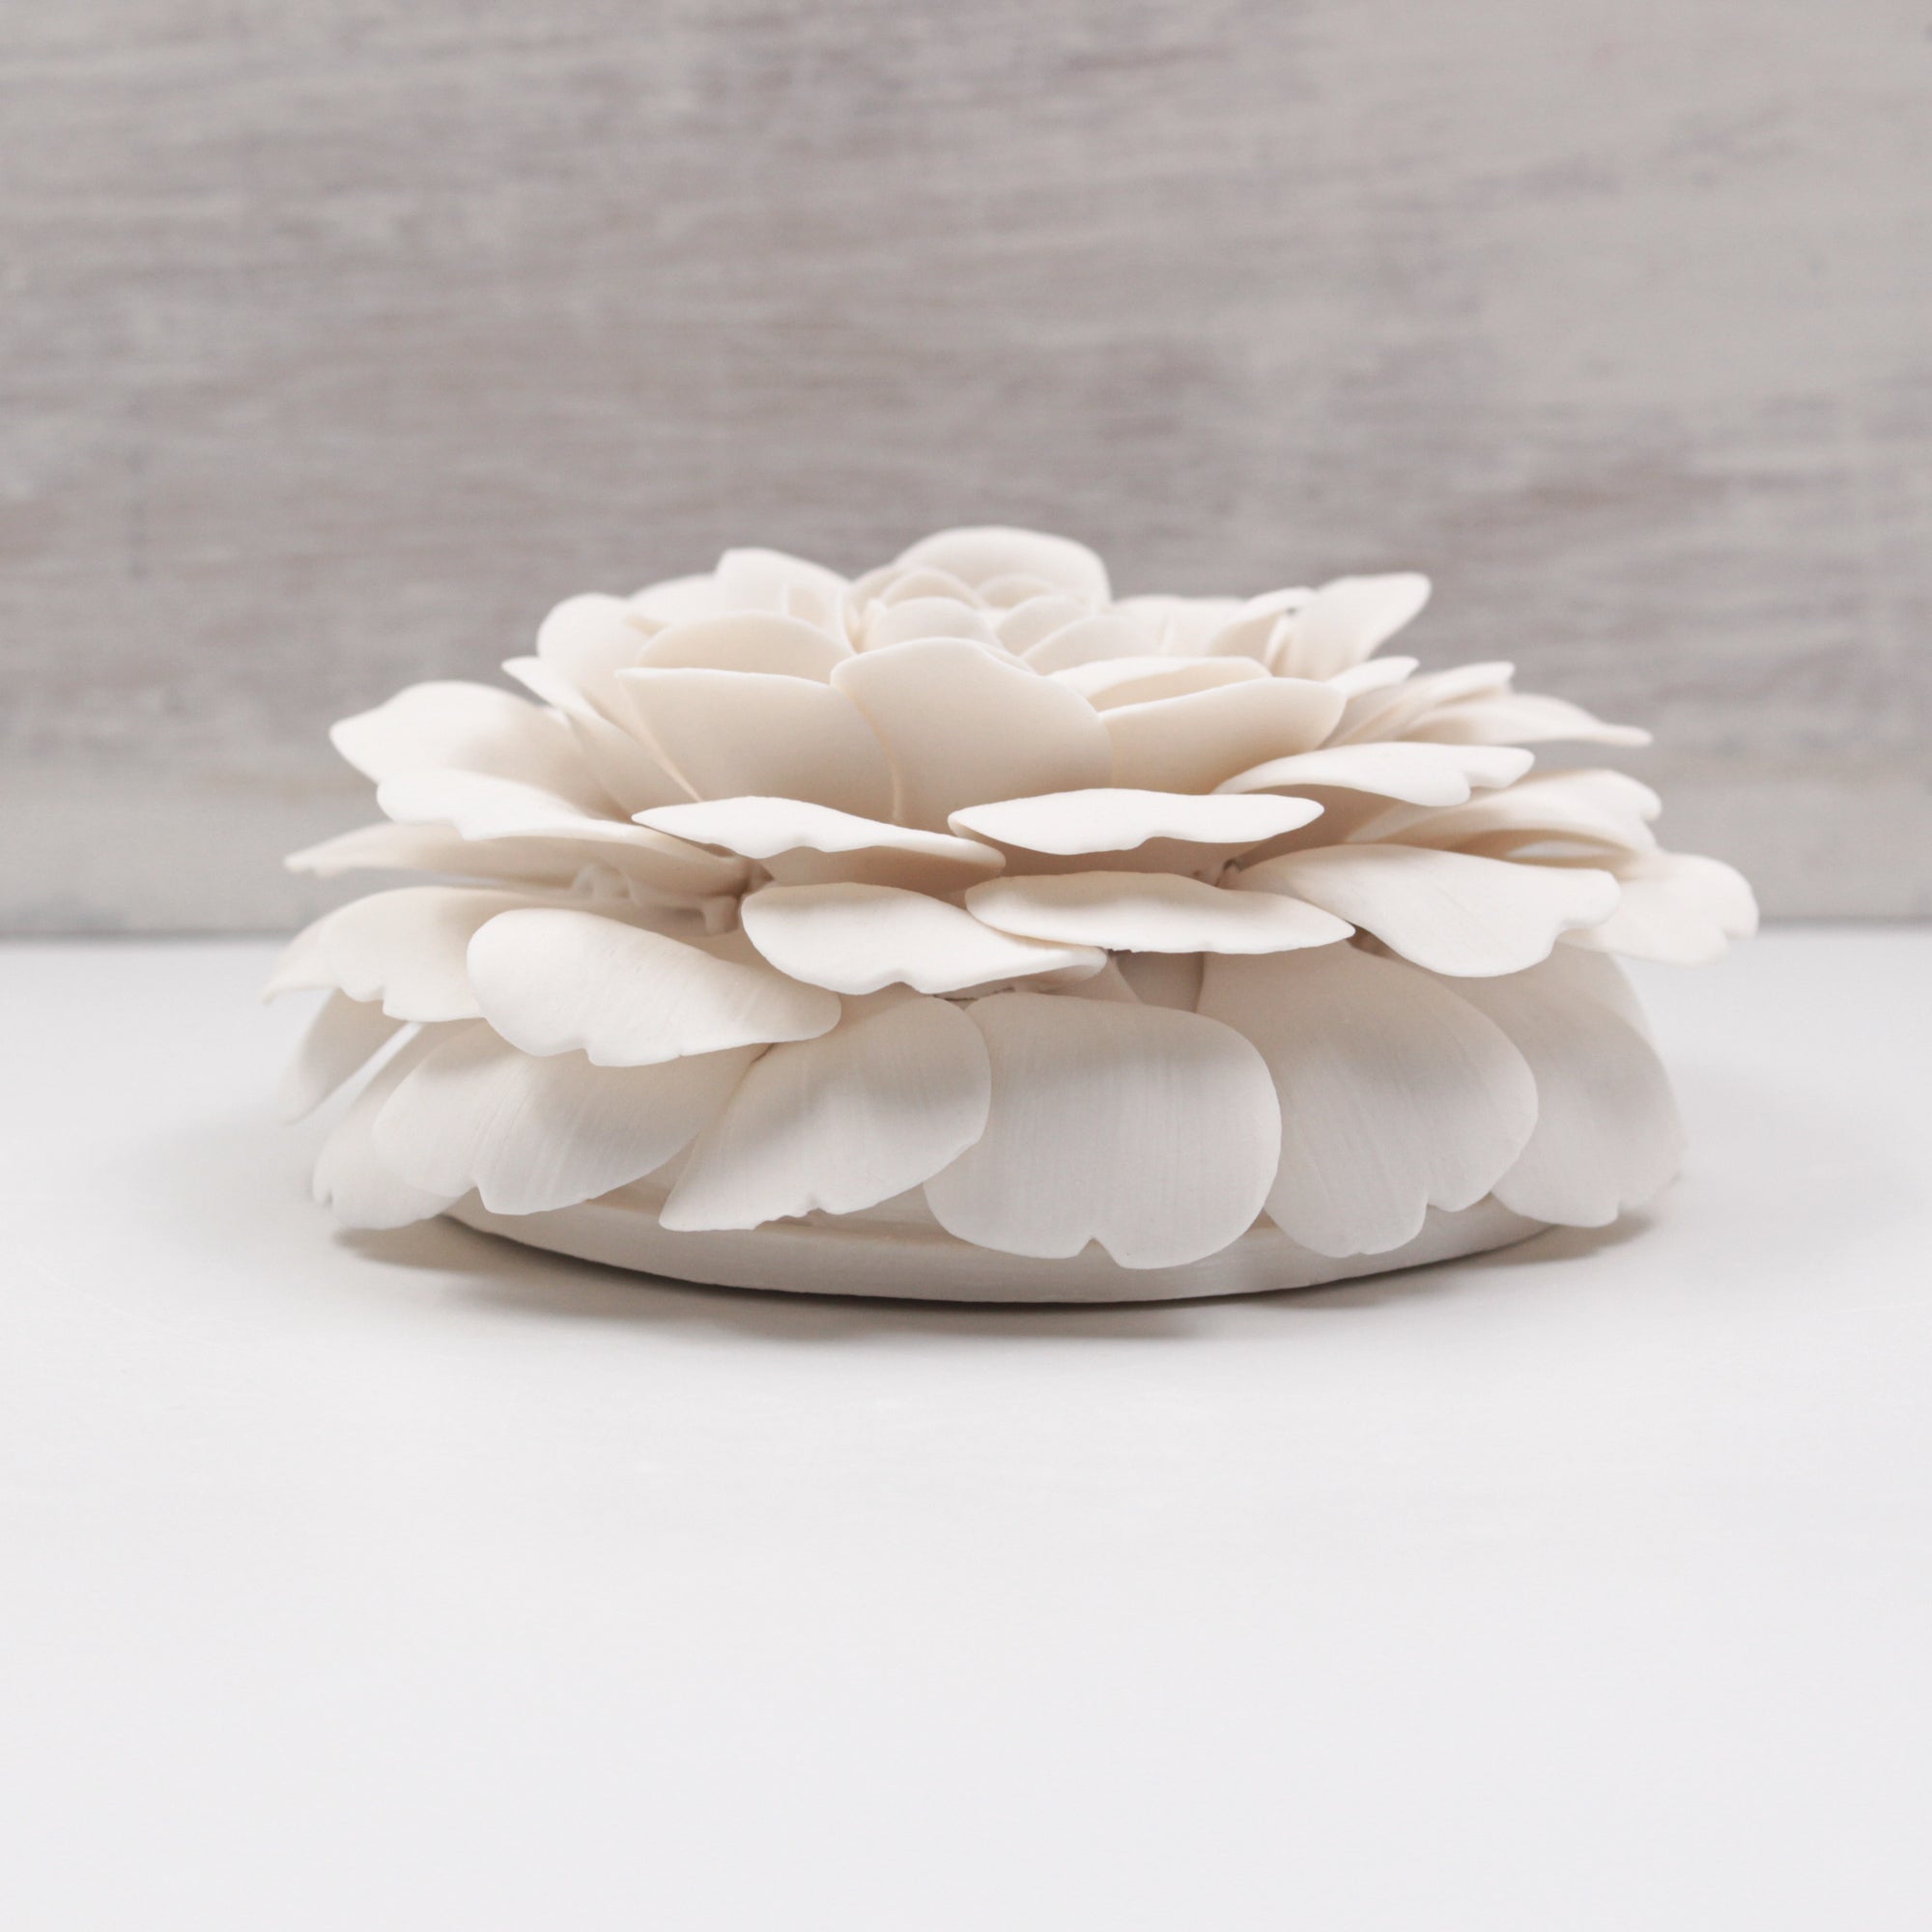 Large Porcelain Camellia- Handmade Porcelain Flower for Interior and Event Decoration - Made in France by Alain Granell - Home and Wall Decoration